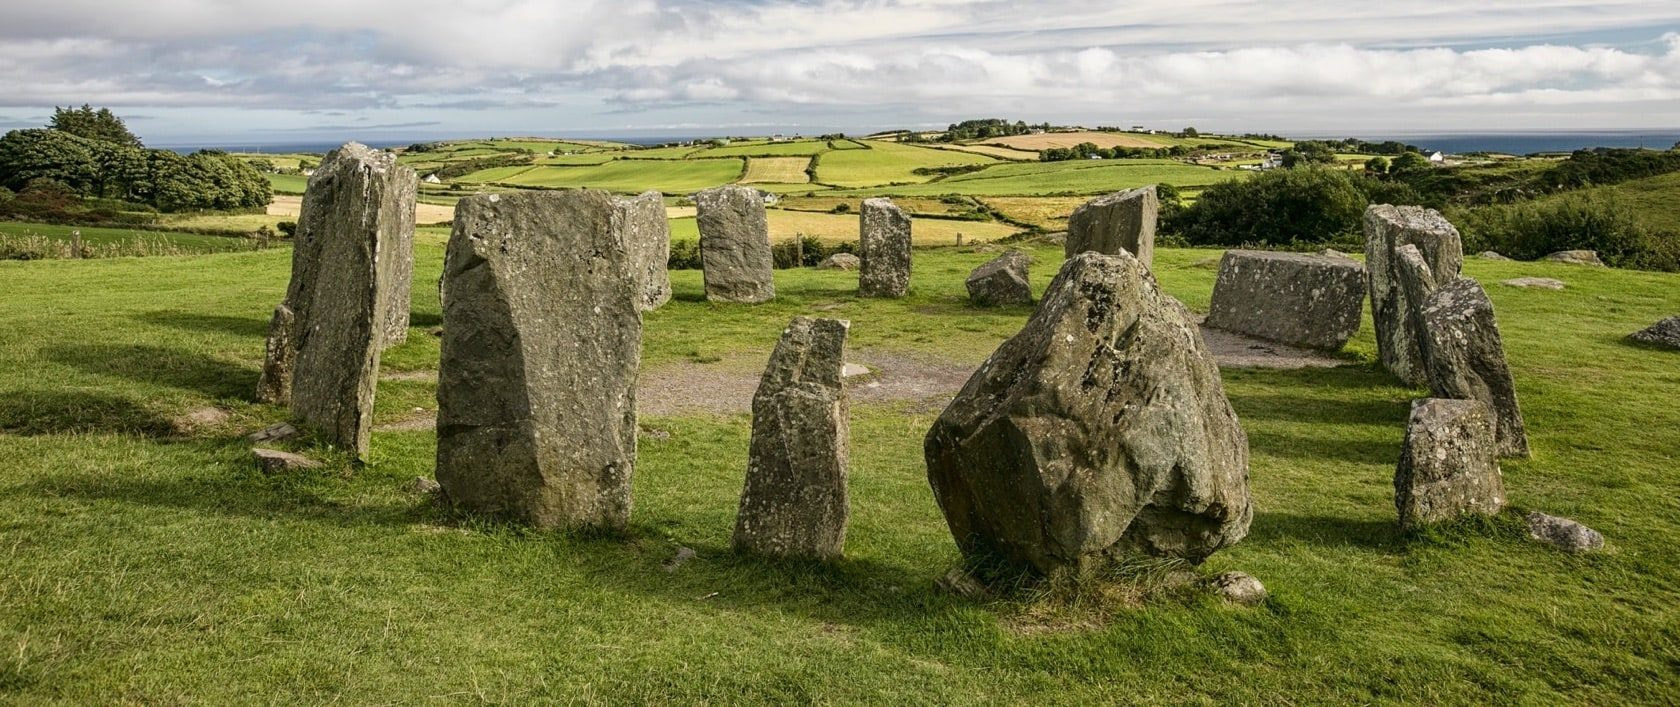 View The Vacation to Ireland Packages